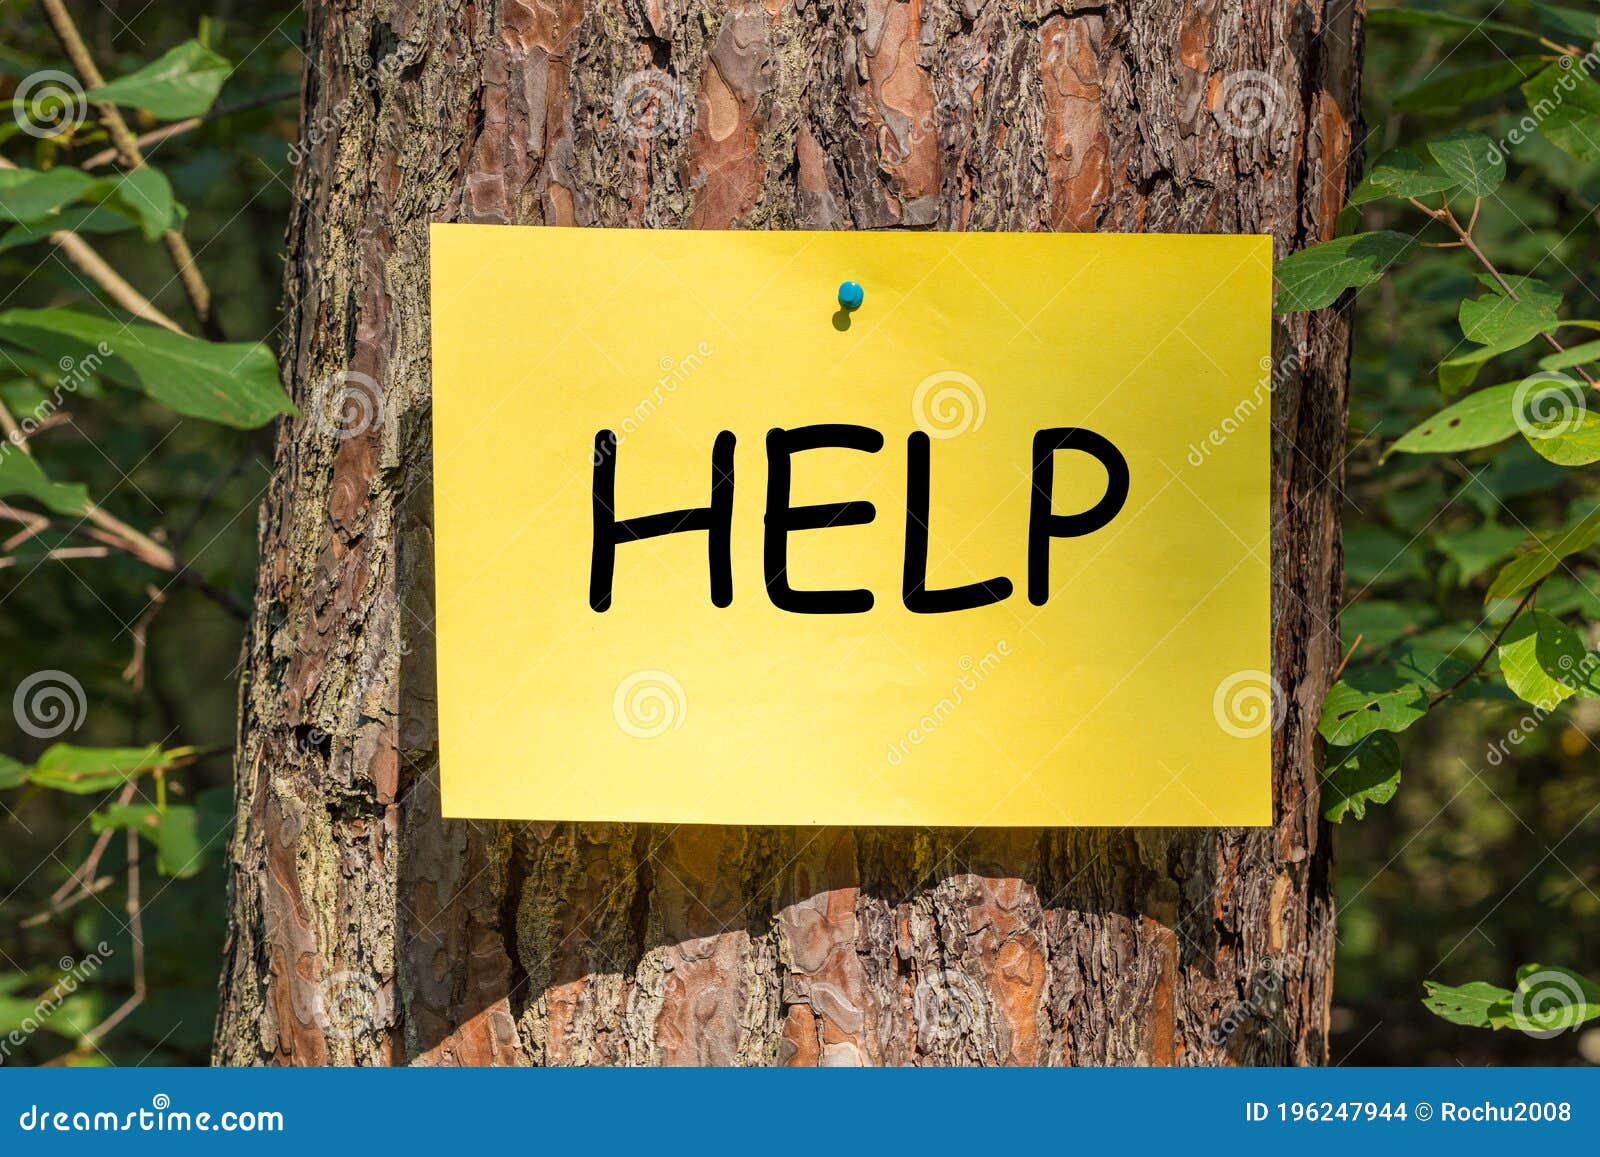 Tree In The Forest With A Yellow Card With The Word Help The Concept Of The Fight To Protect The Green Lungd Of The Earth Stock Photo Image Of Friendly Environment